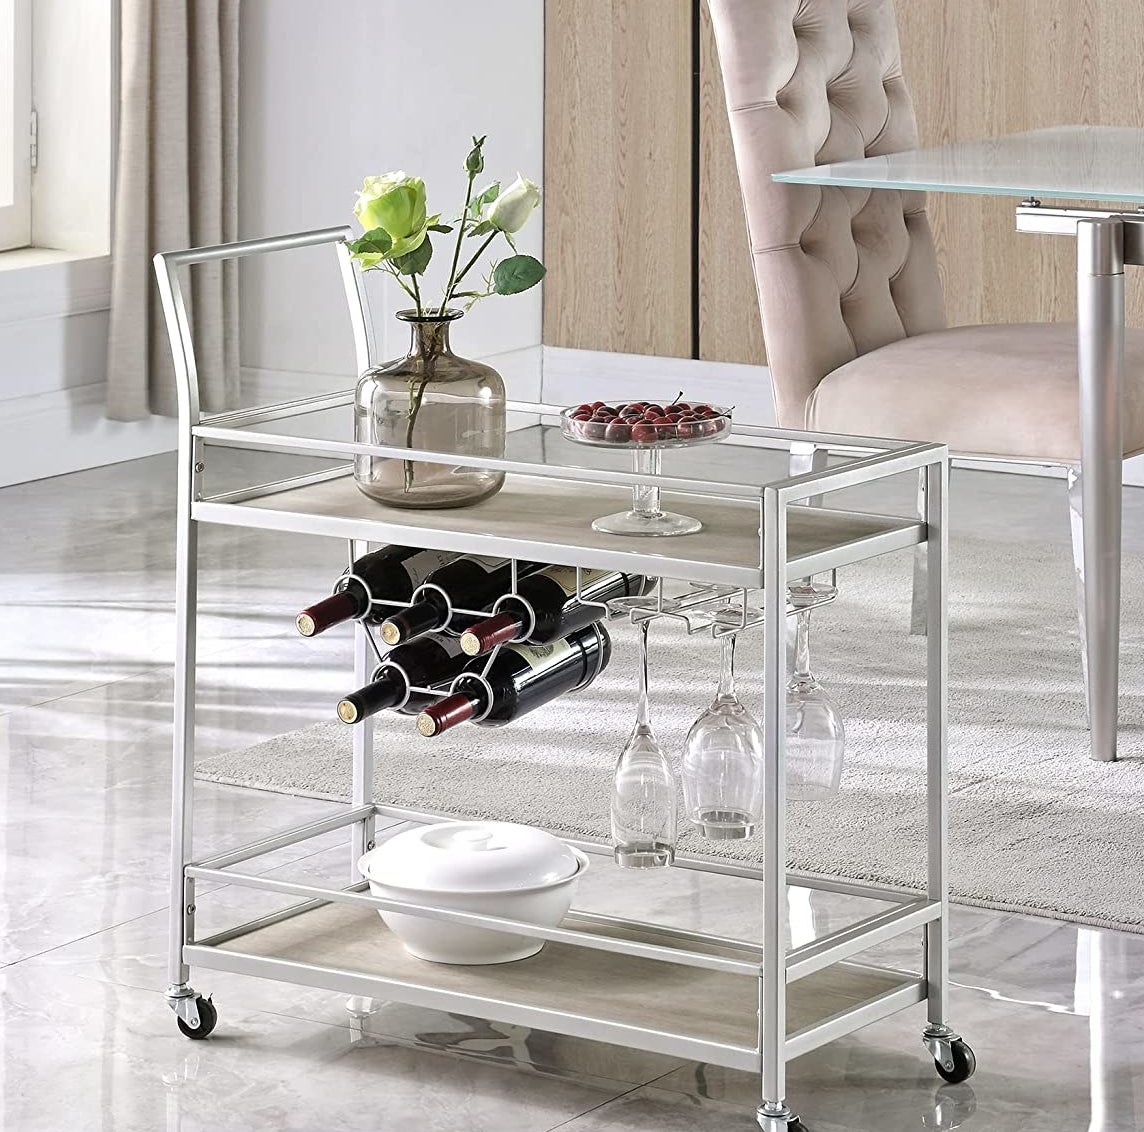 Image of the silver bar cart